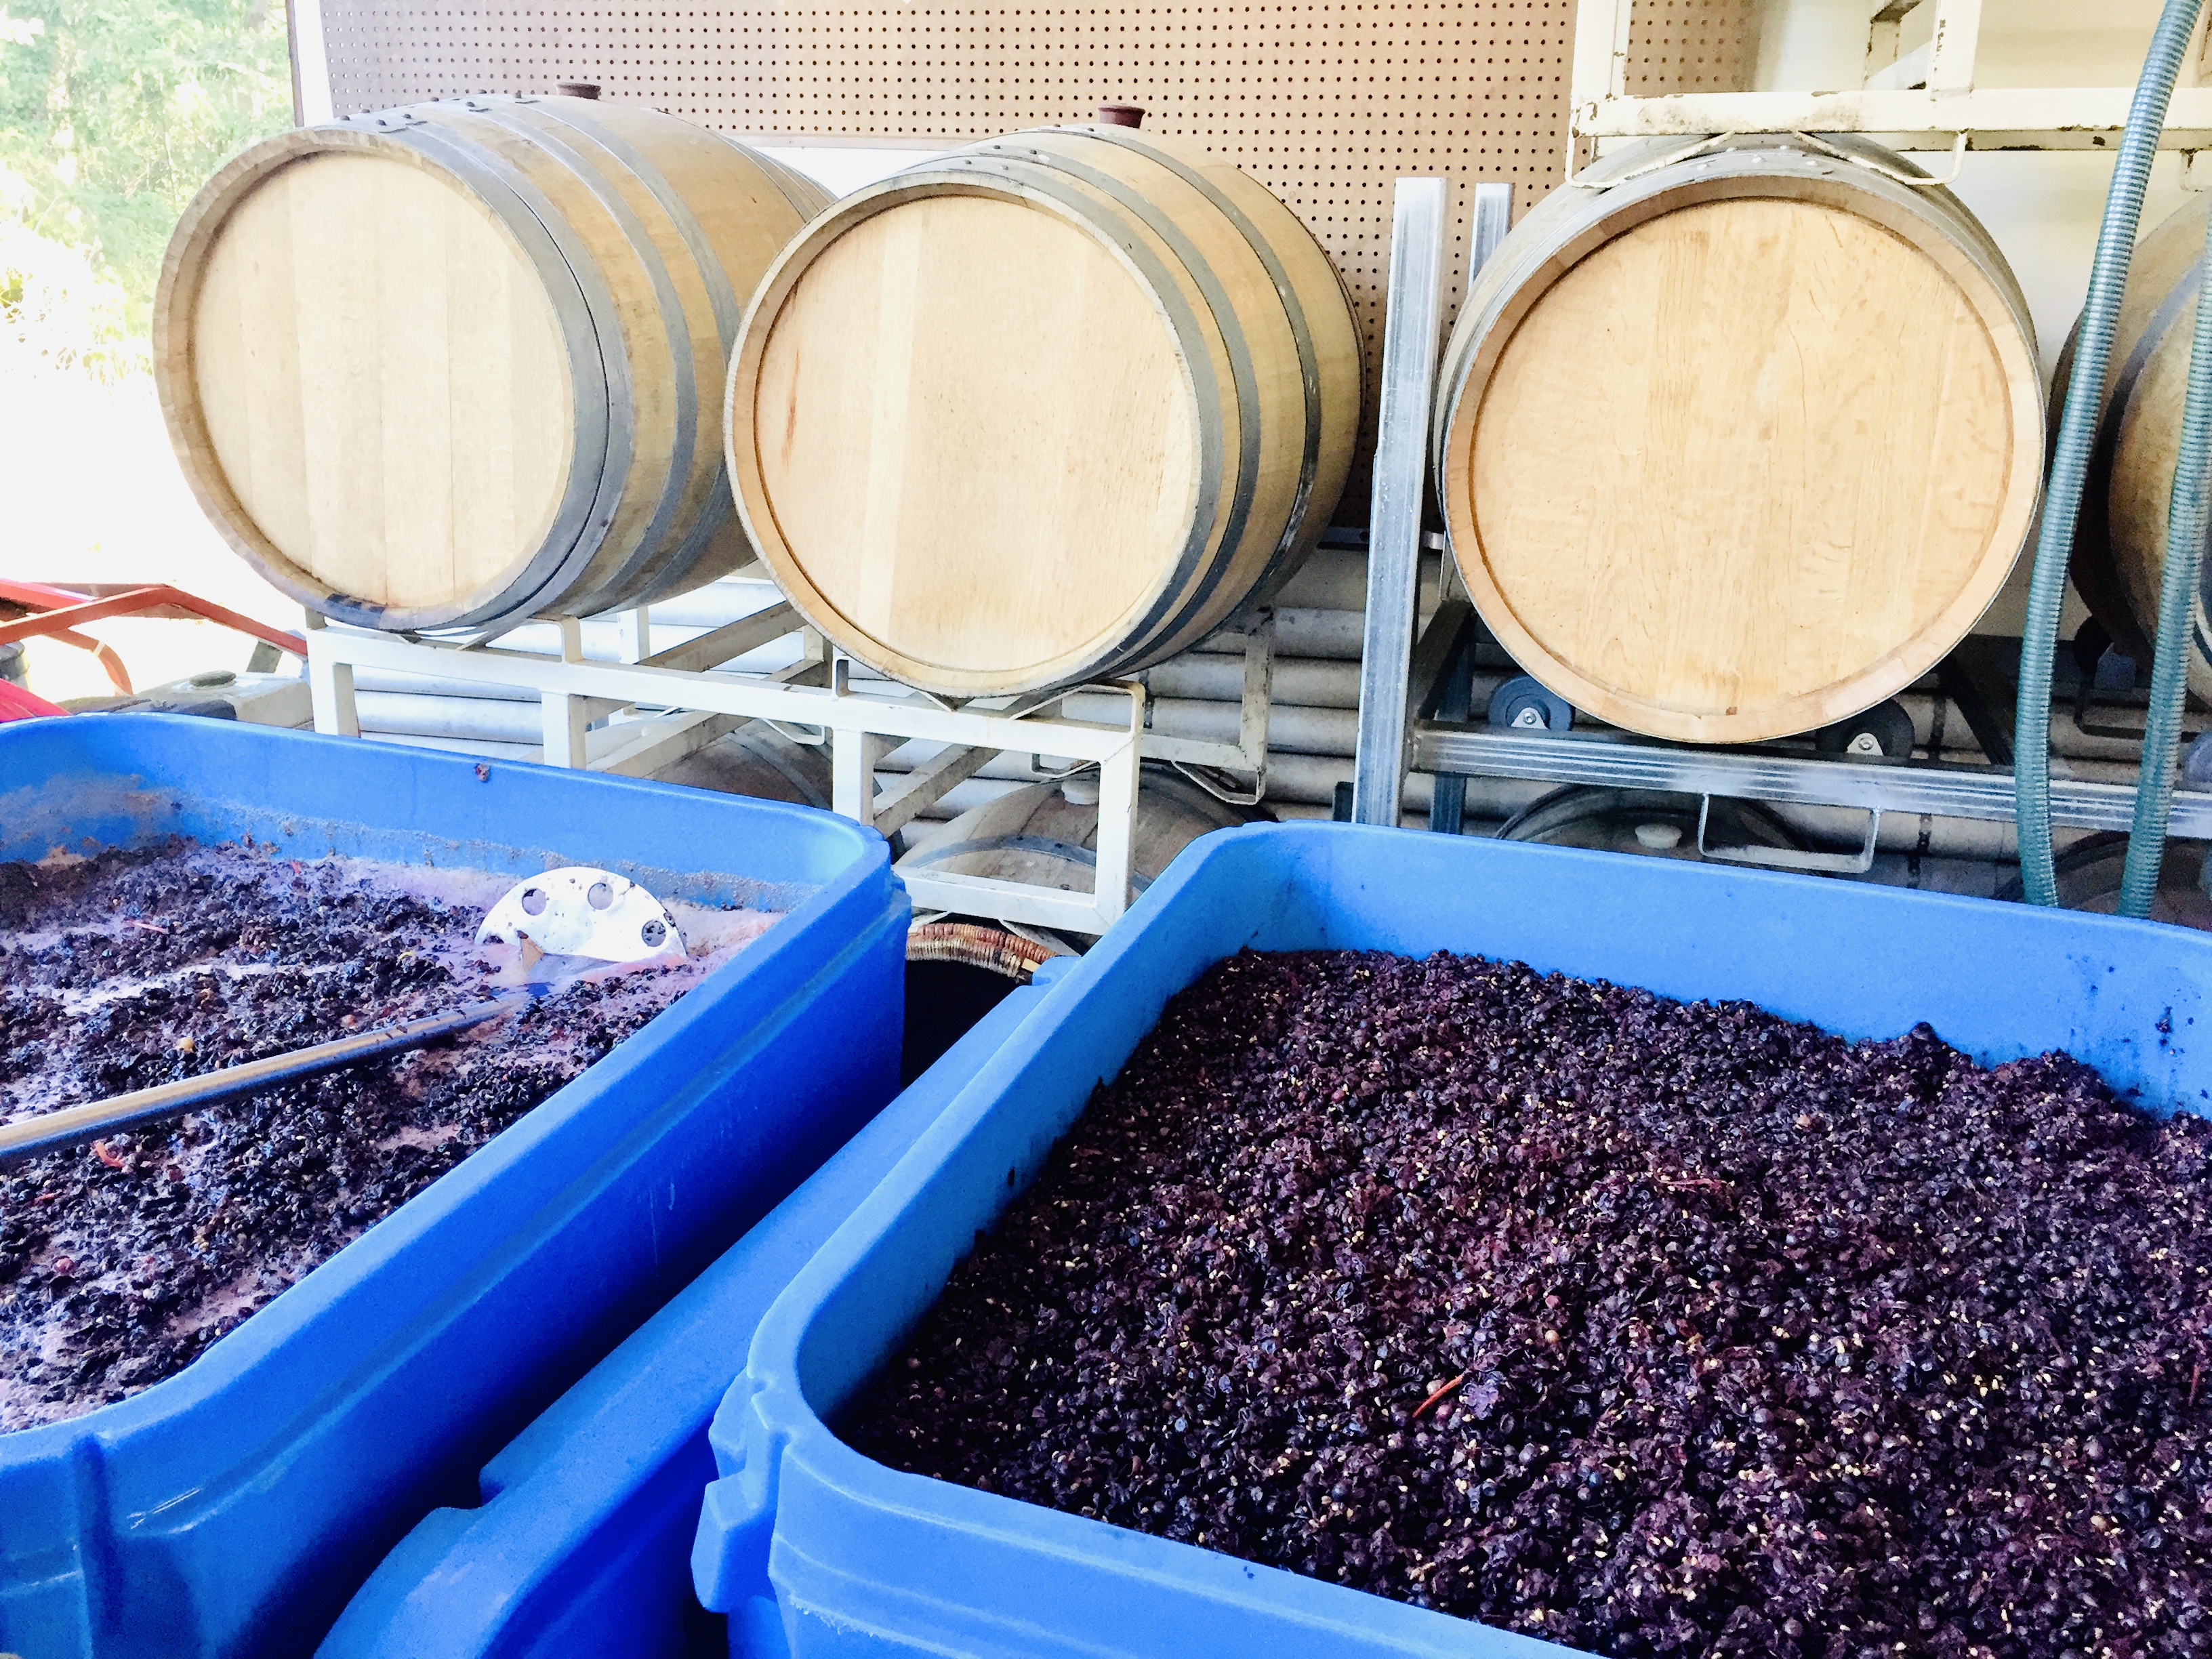 image of containers of wine grapes sitting in front of wooden wine casks